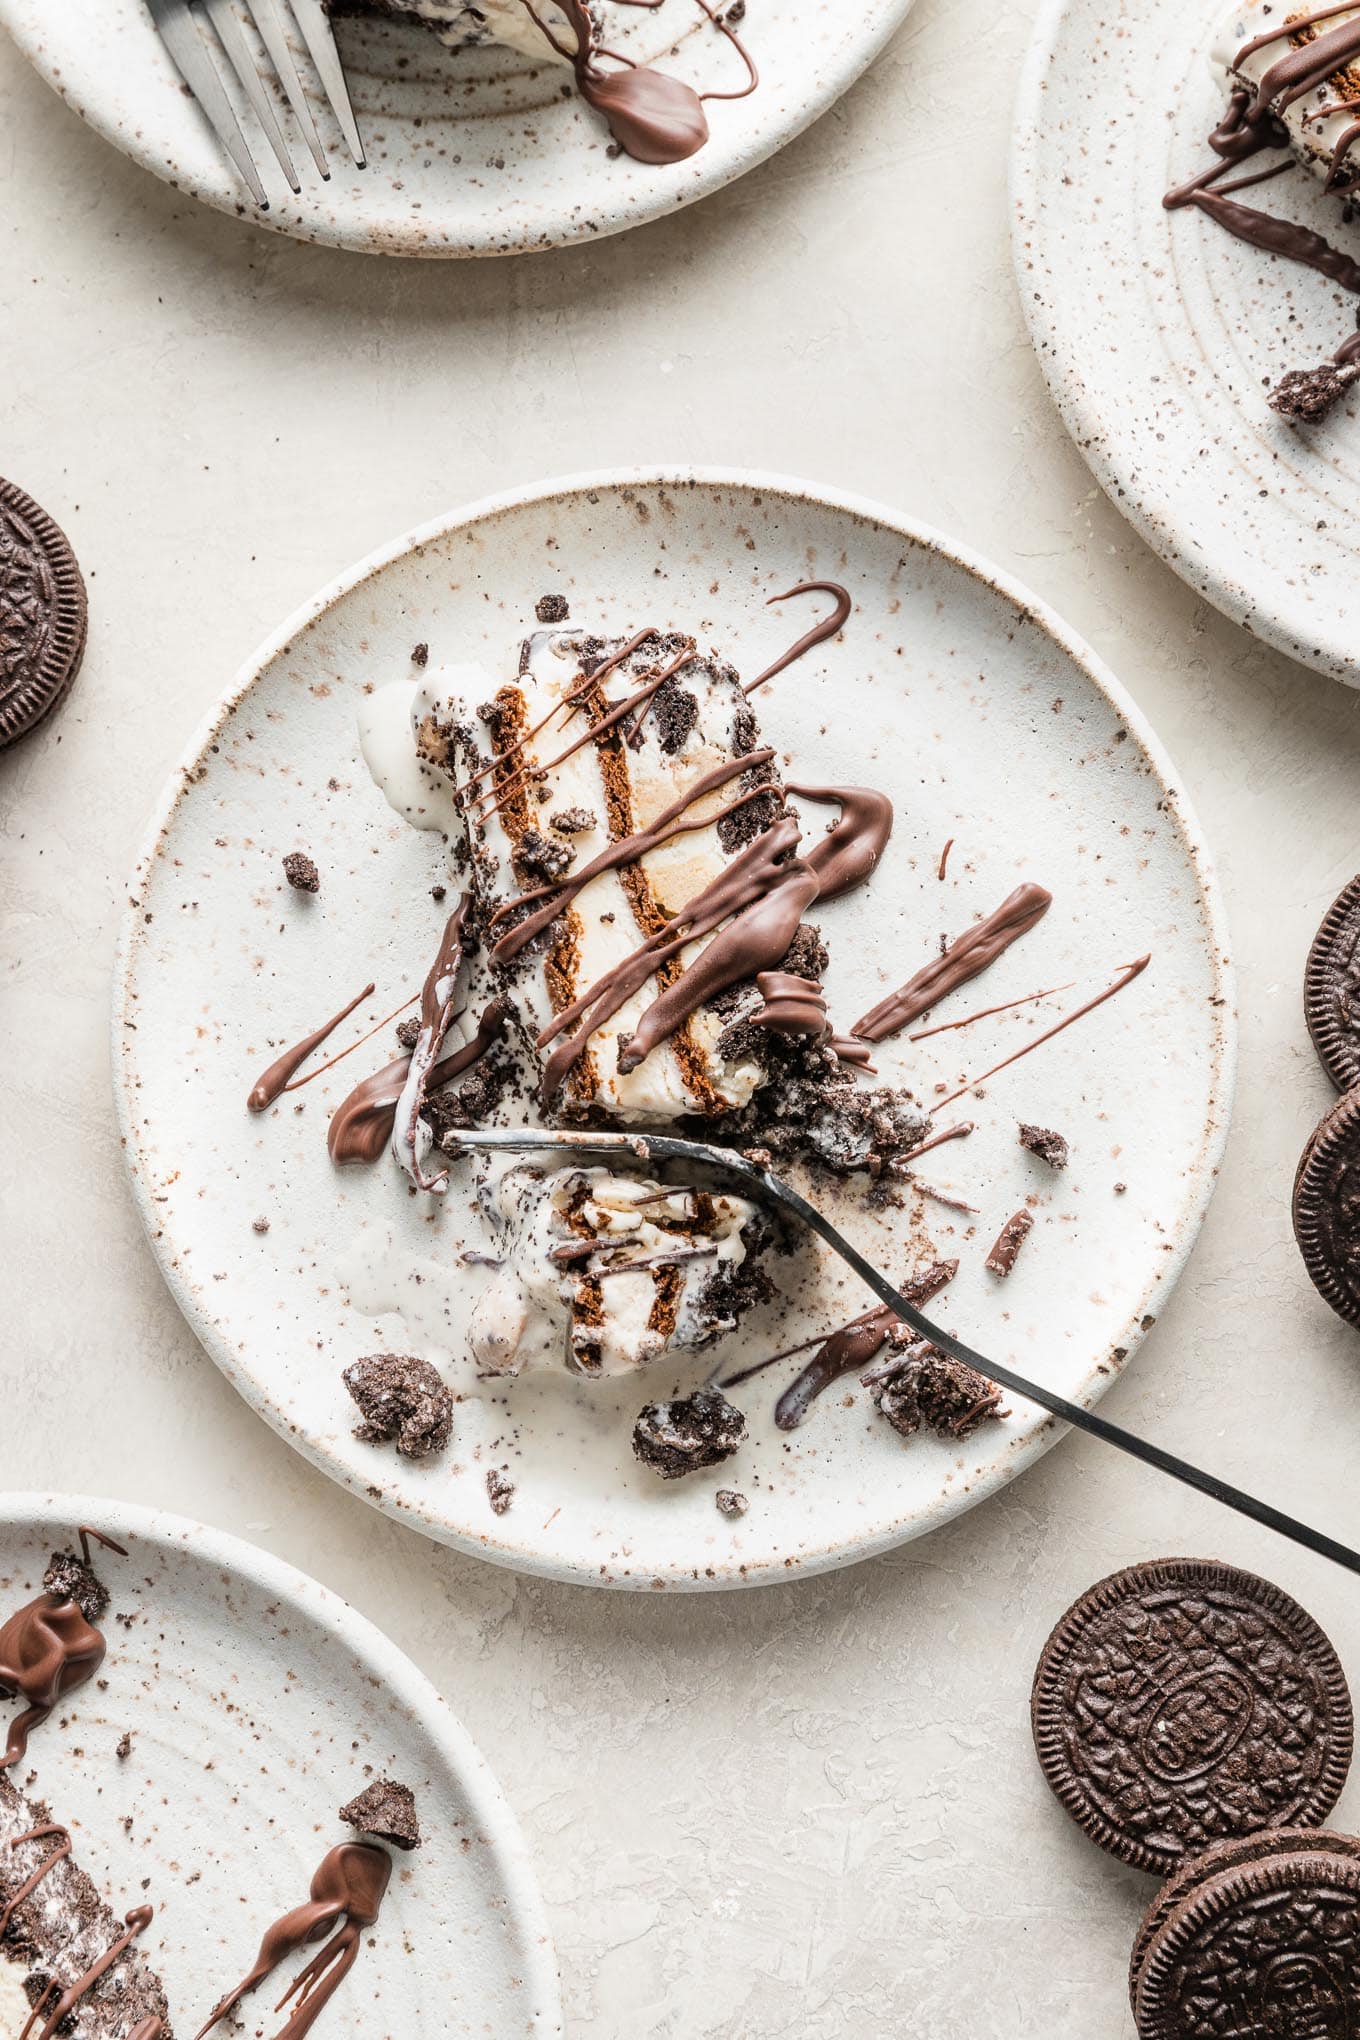 16 Desserts Made For Oreo Lovers